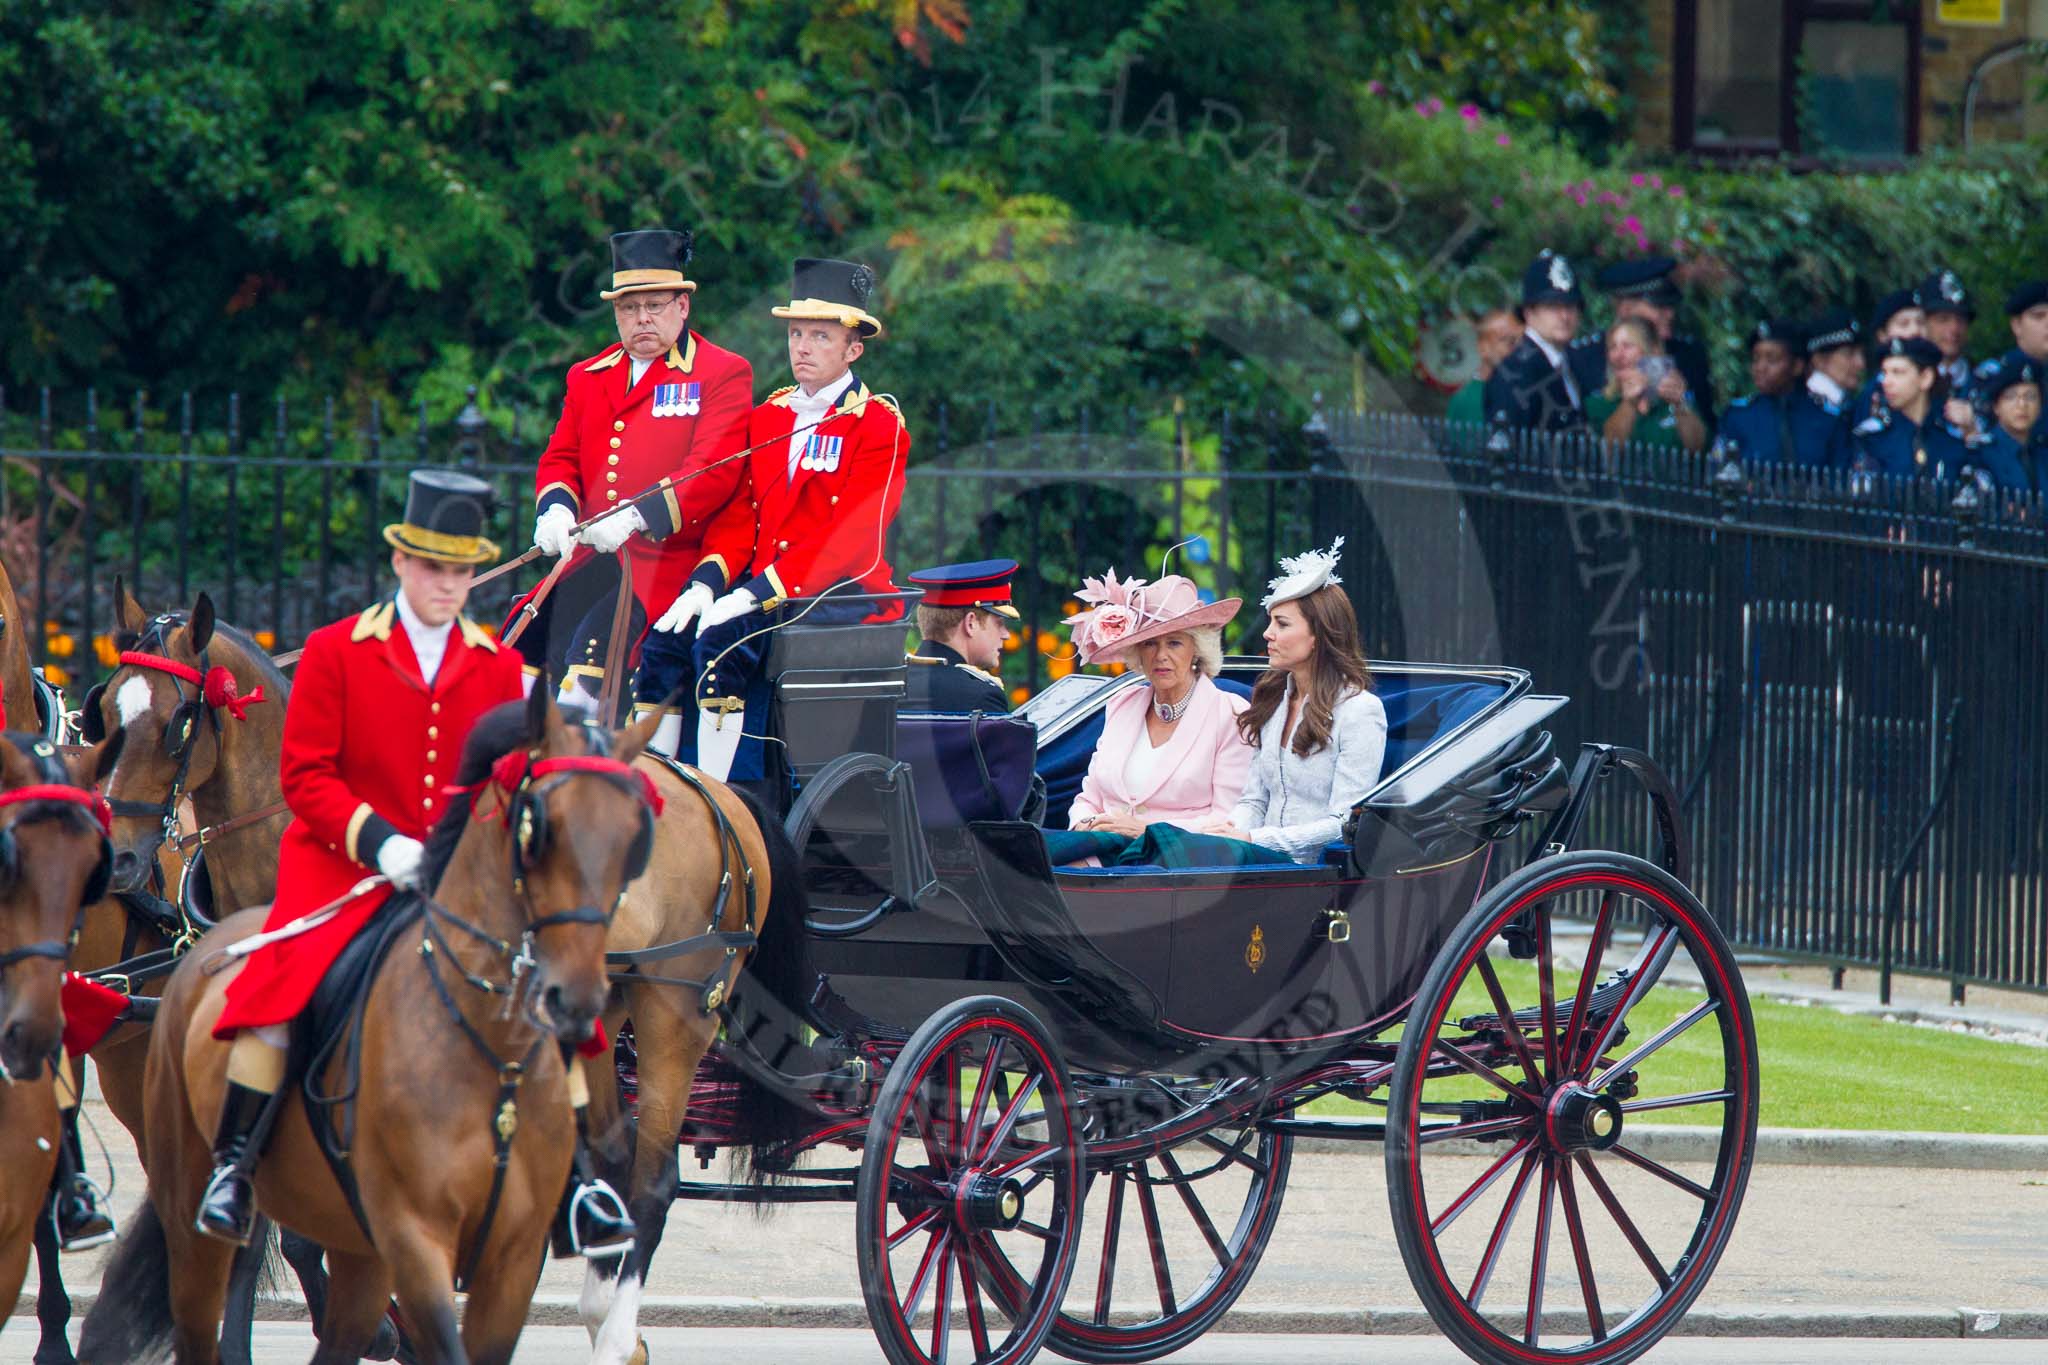 Trooping the Colour 2014.
Horse Guards Parade, Westminster,
London SW1A,

United Kingdom,
on 14 June 2014 at 10:49, image #264